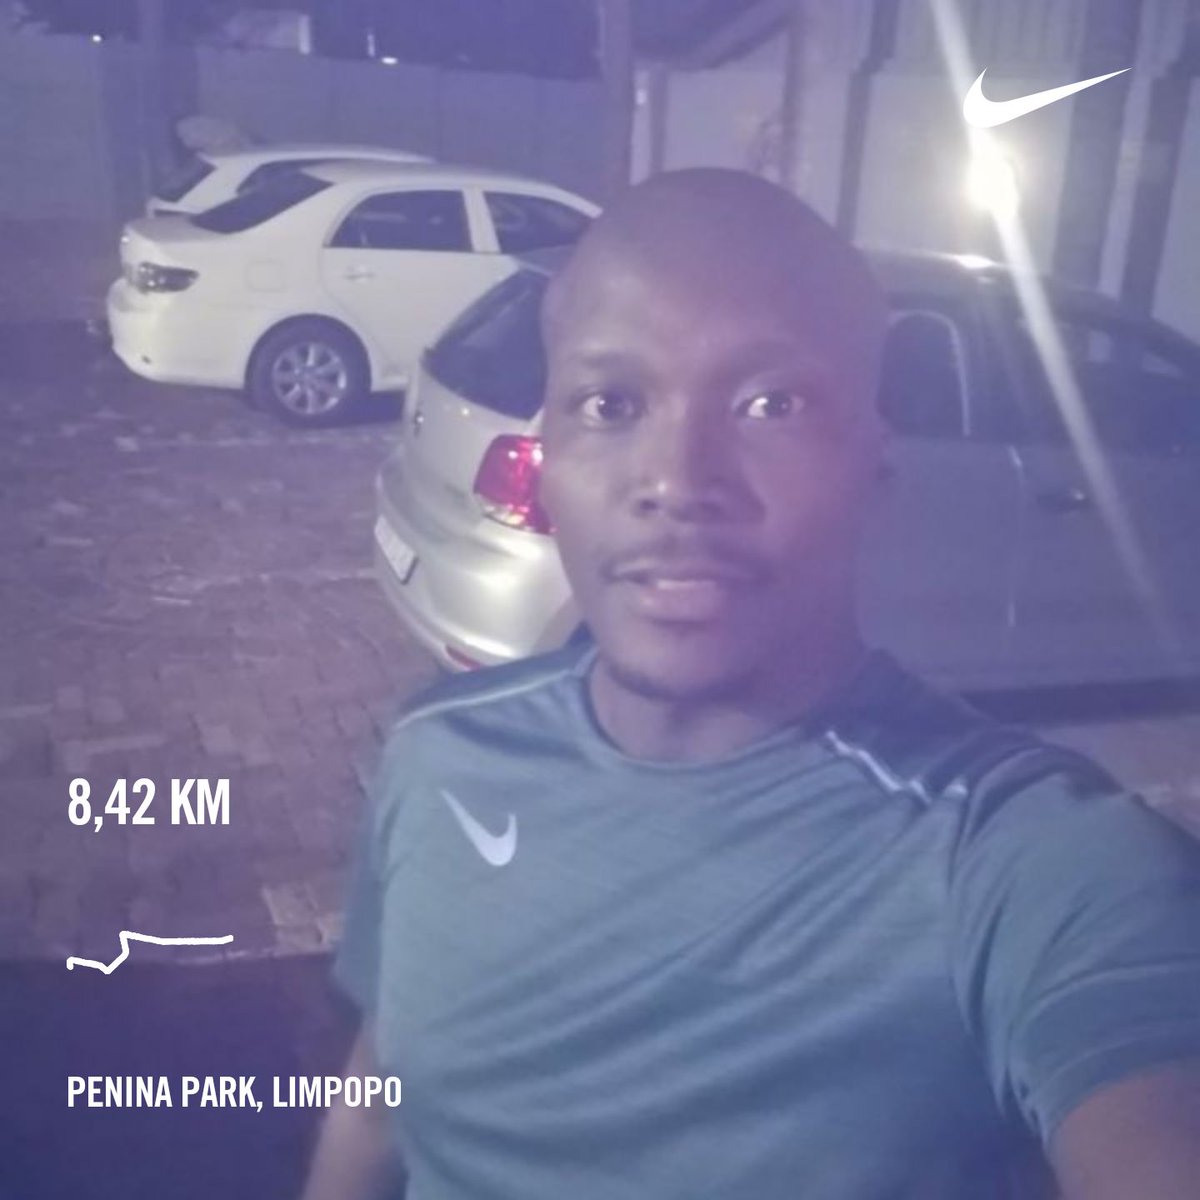 Keep the people that check up on you without needing favour's 

#WaterMelonGang 🍉🍉
#RunningWithTumiSole
#BudgetInsurancexRunningWithSoleAC
#ipaintedmyrun
#staysafe
#NikeRunClub
#IChoose2BActive
#FetchYourBody2024
#Starting2024Healthy